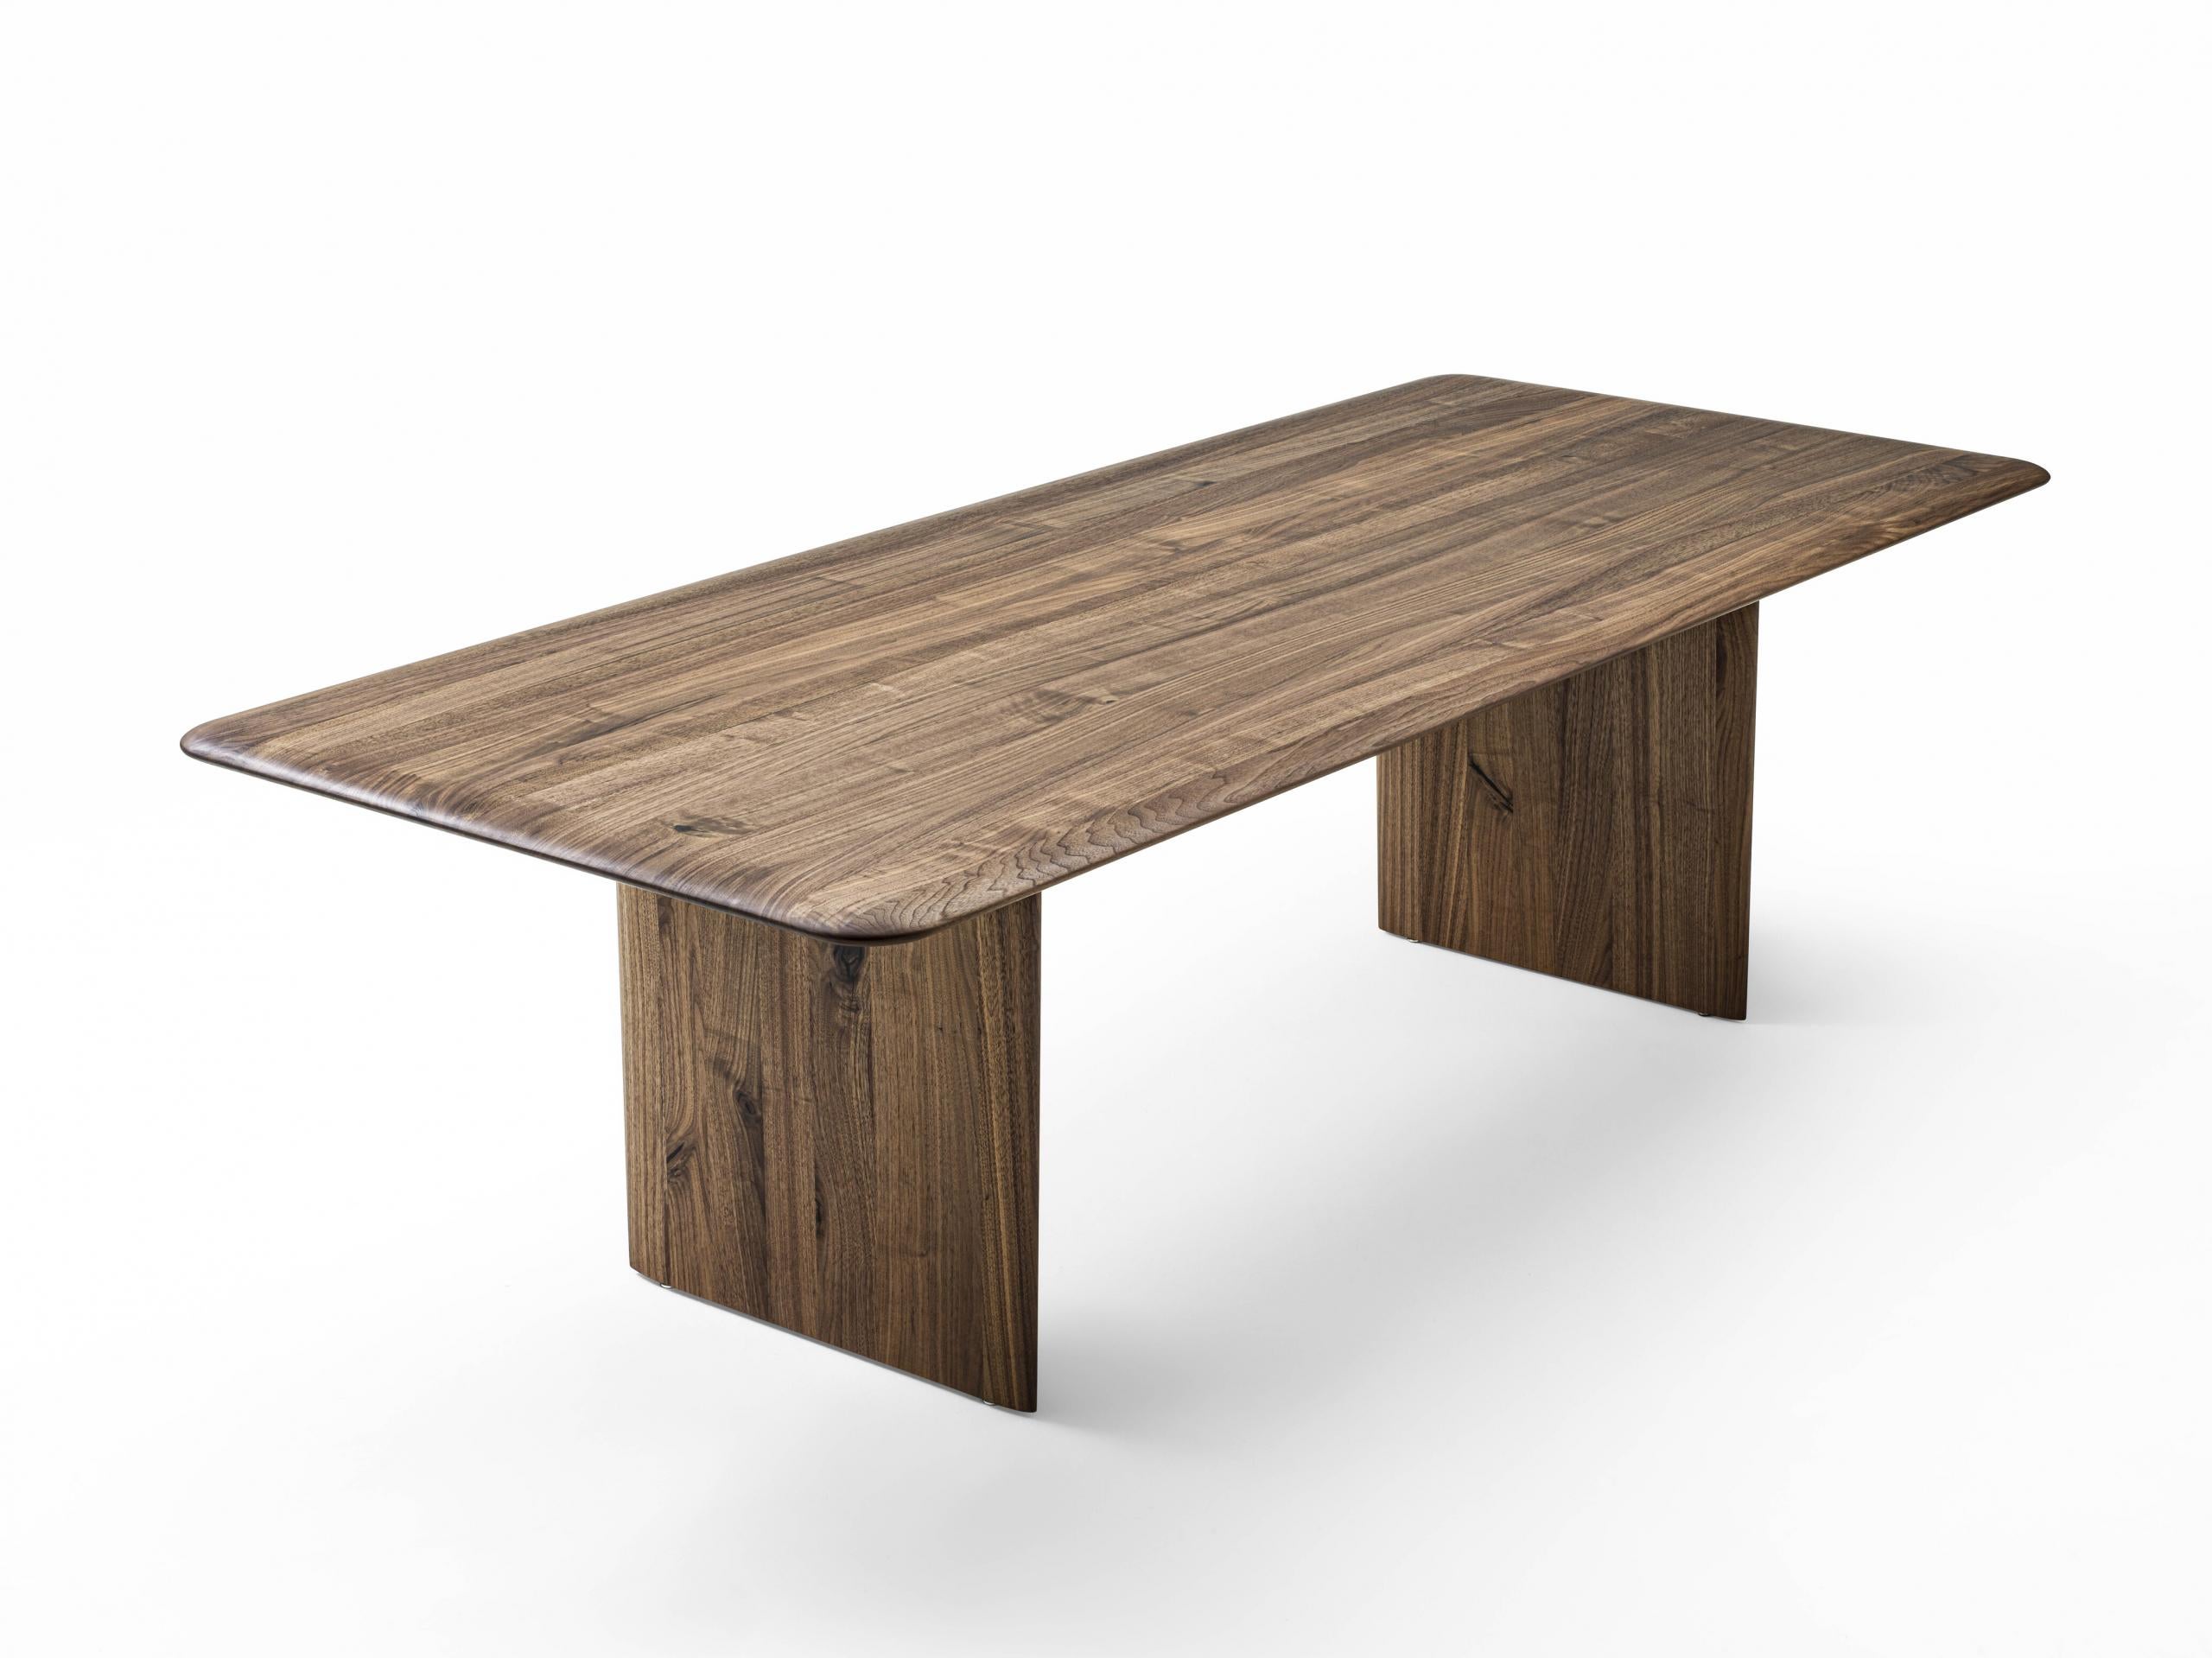 Table entirely made of solid wood with glued lists with rounded sides, characterized by top and legs having thin thicknesses thanks to the bevelled and rounded edges which give it a light and sinuous design.

Available in a variety of sizes and